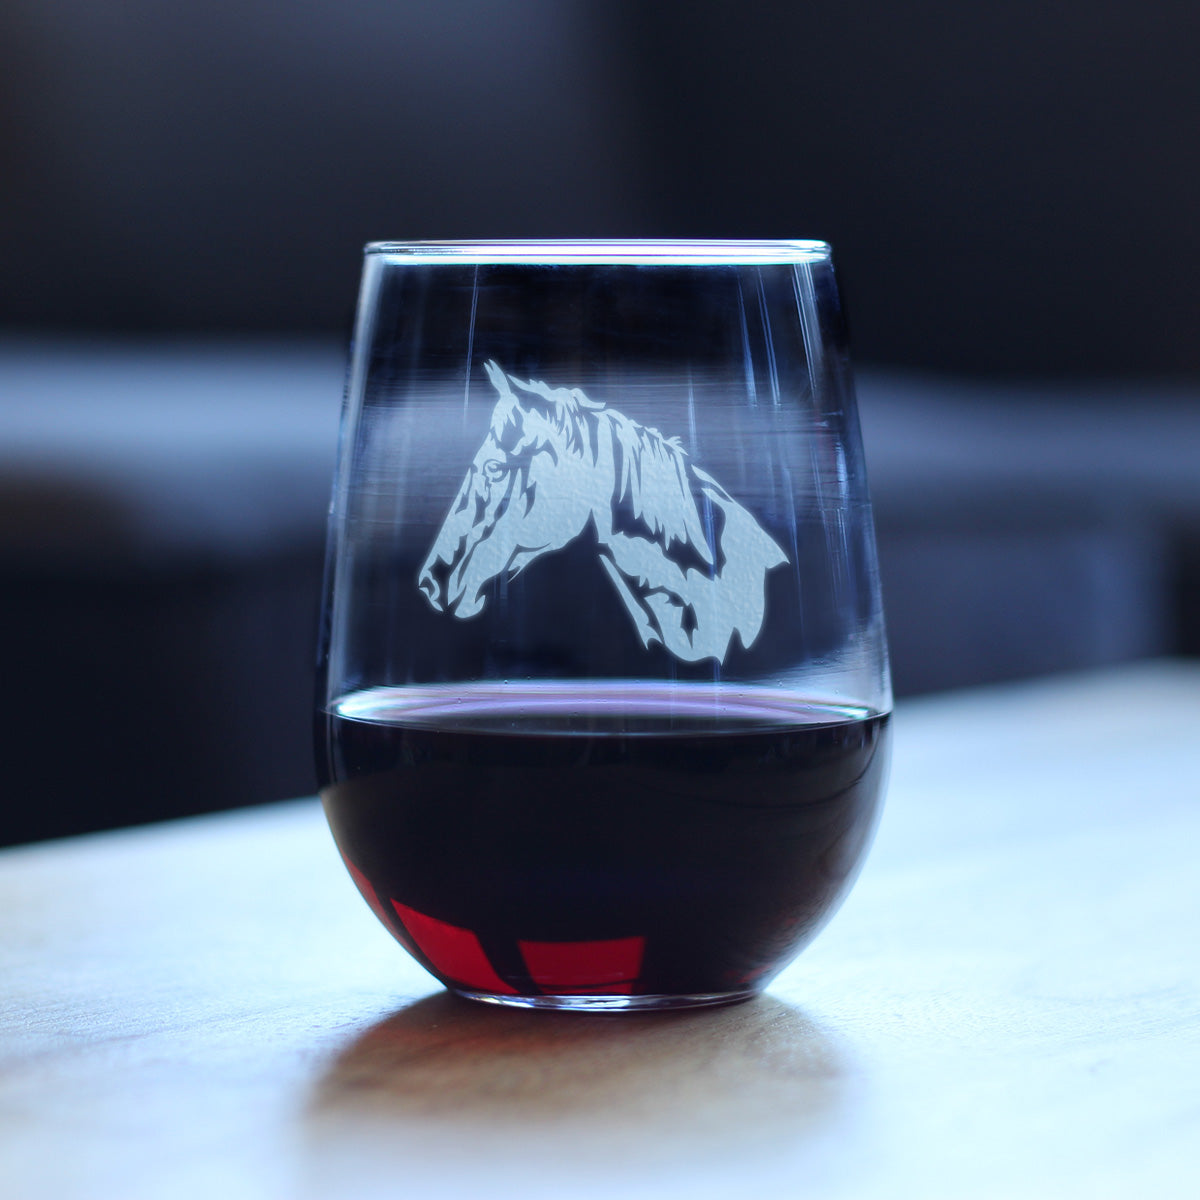 Horse Face Stemless Wine Glass - Western Themed Farm Decor and Gifts for Horseback Riders - Large 17 Oz Glasses